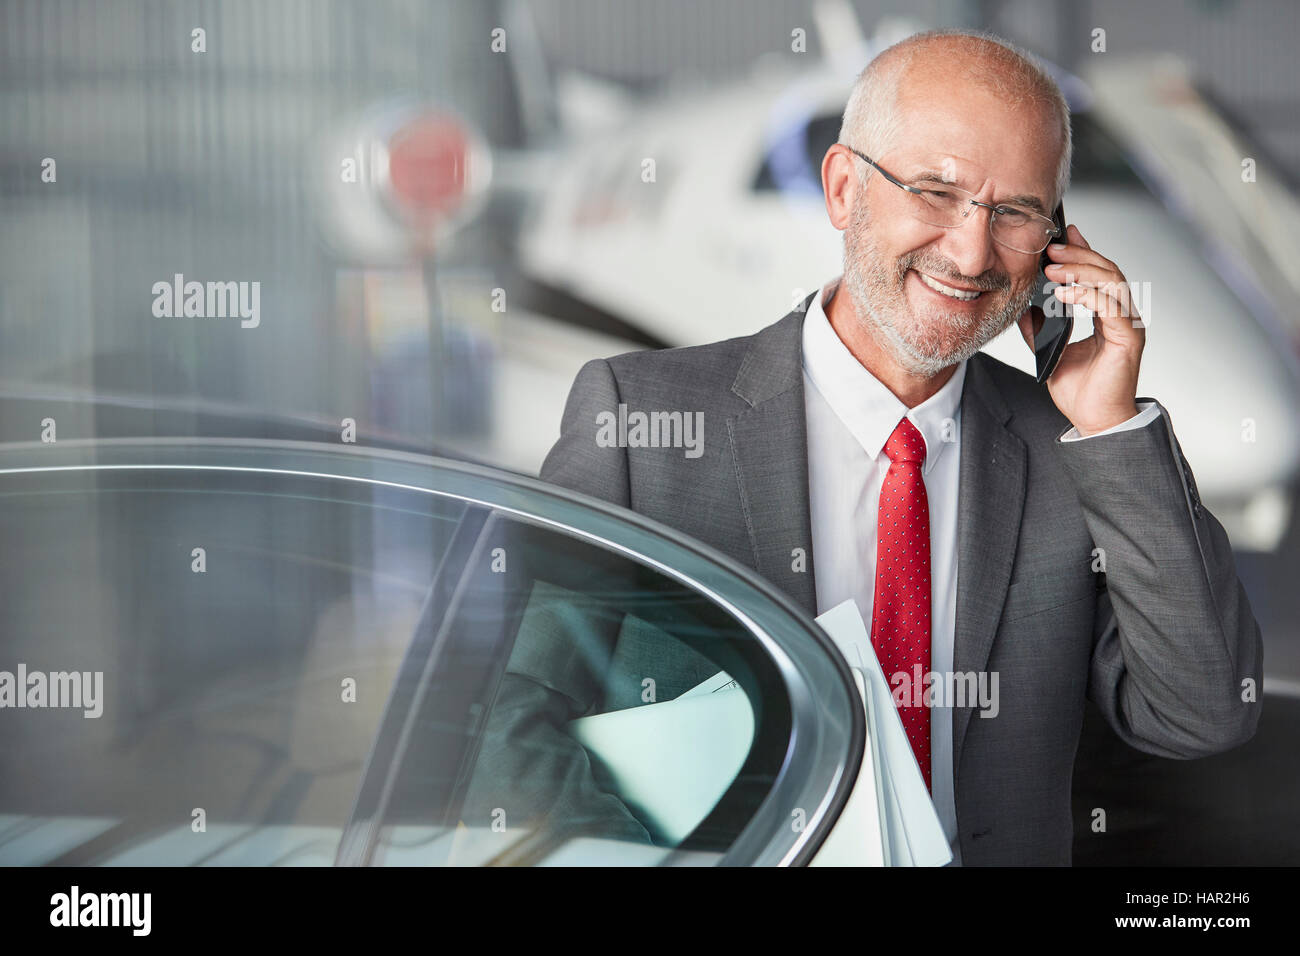 Smiling businessman talking on cell phone in airplane hangar Banque D'Images